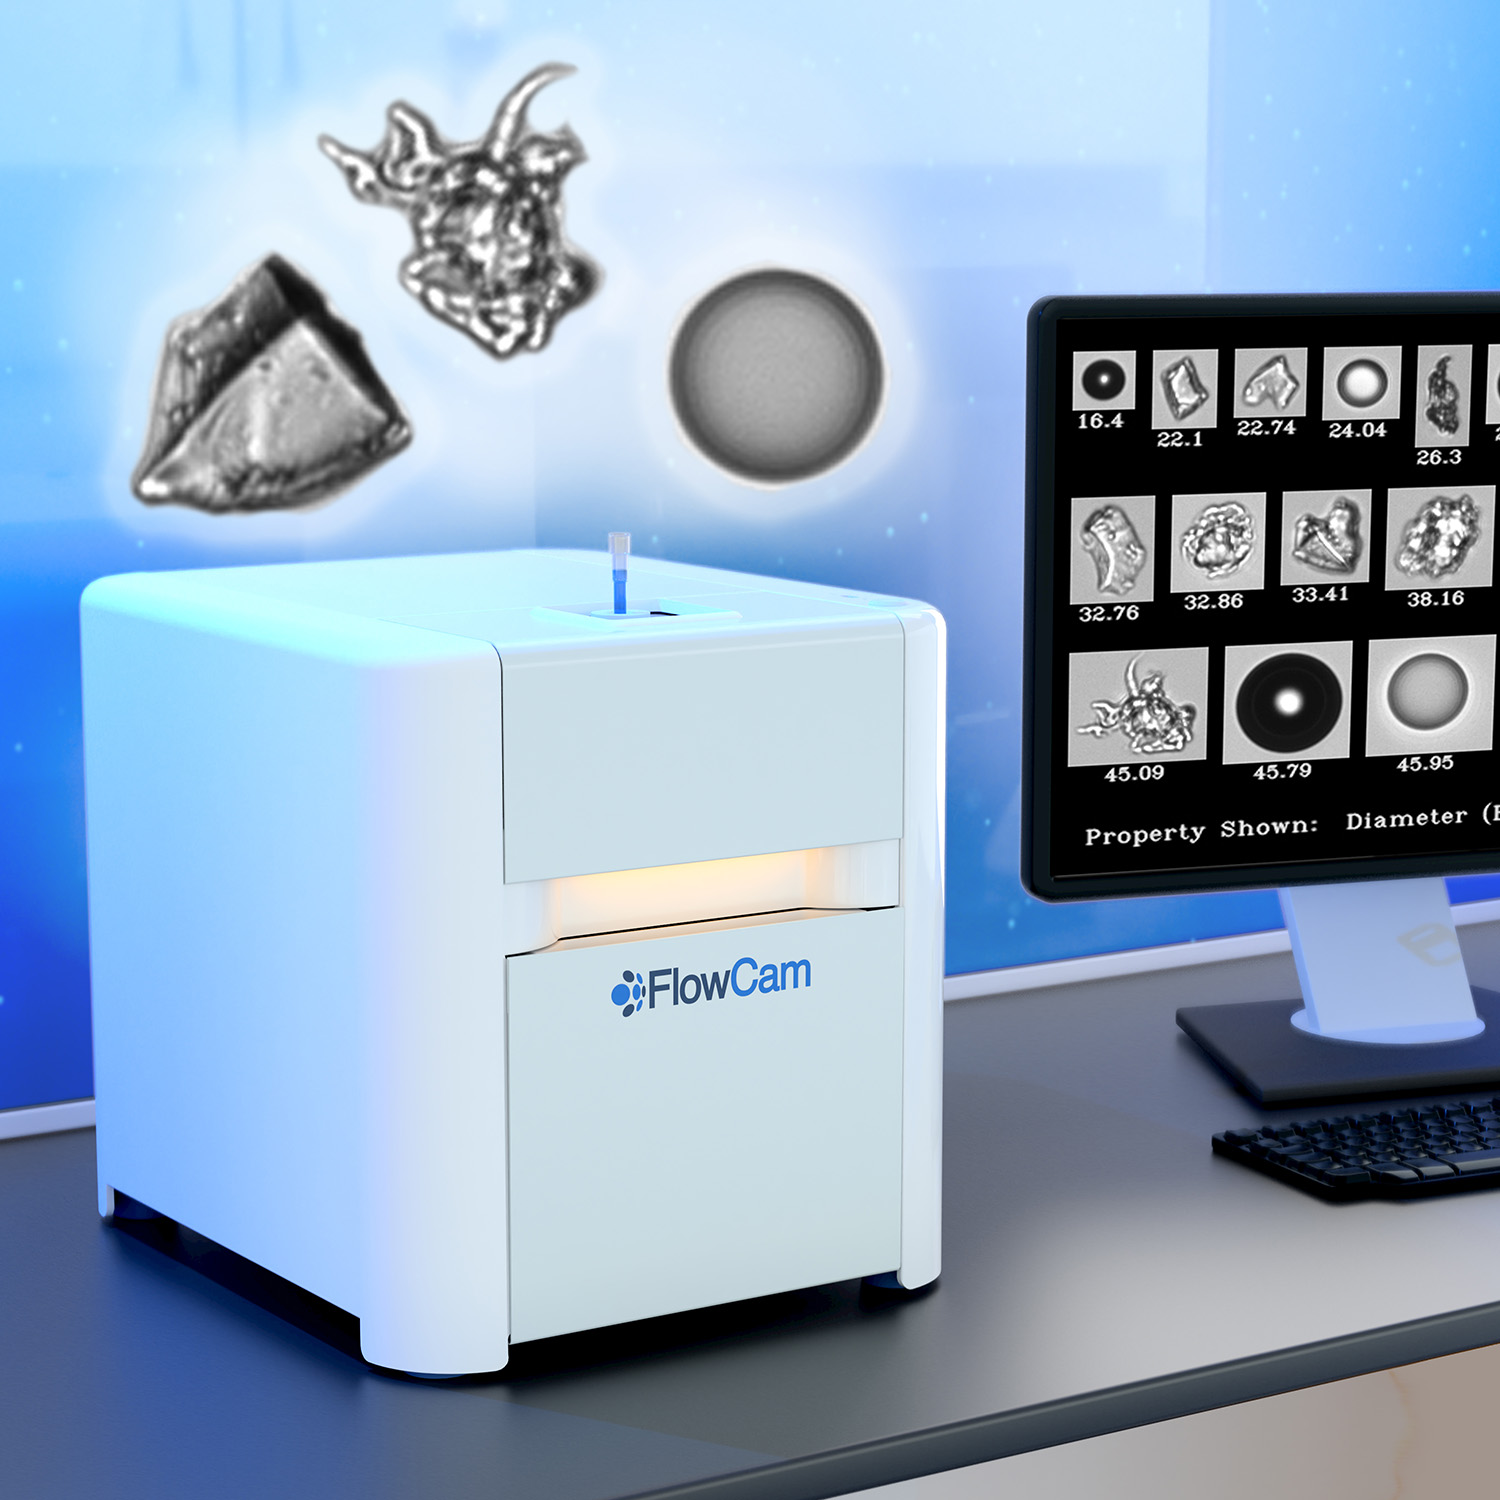 FlowCam Compares Favorably to MFI and Light Obscuration: Collaborative Study by Japanese Biopharmaceutical Consortium